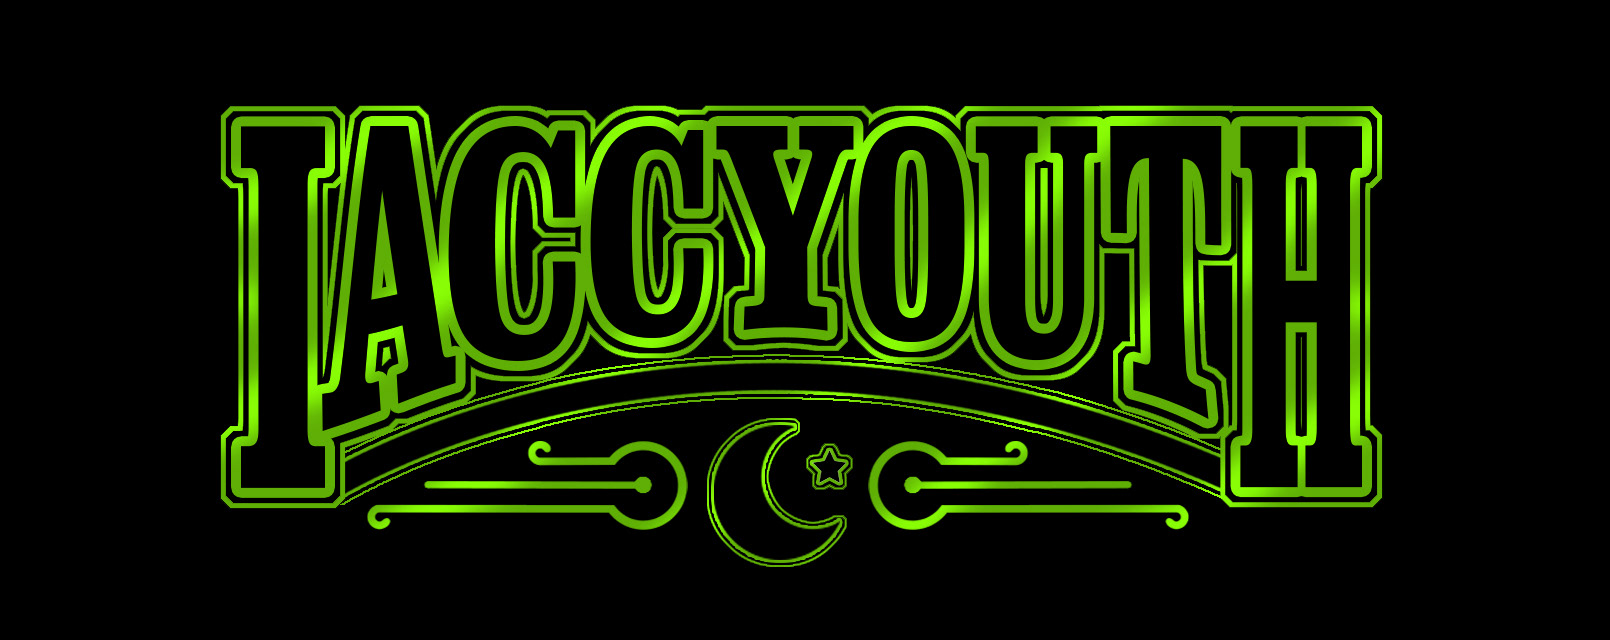 Again, after that Star Wars trailer I was somewhat enamored. So I redesigned our Youth Group logo to look like a LucasFilms logo. Then I had the idea that we could use that to promote a space-themed event. And then I had the idea to hold a youth conference.